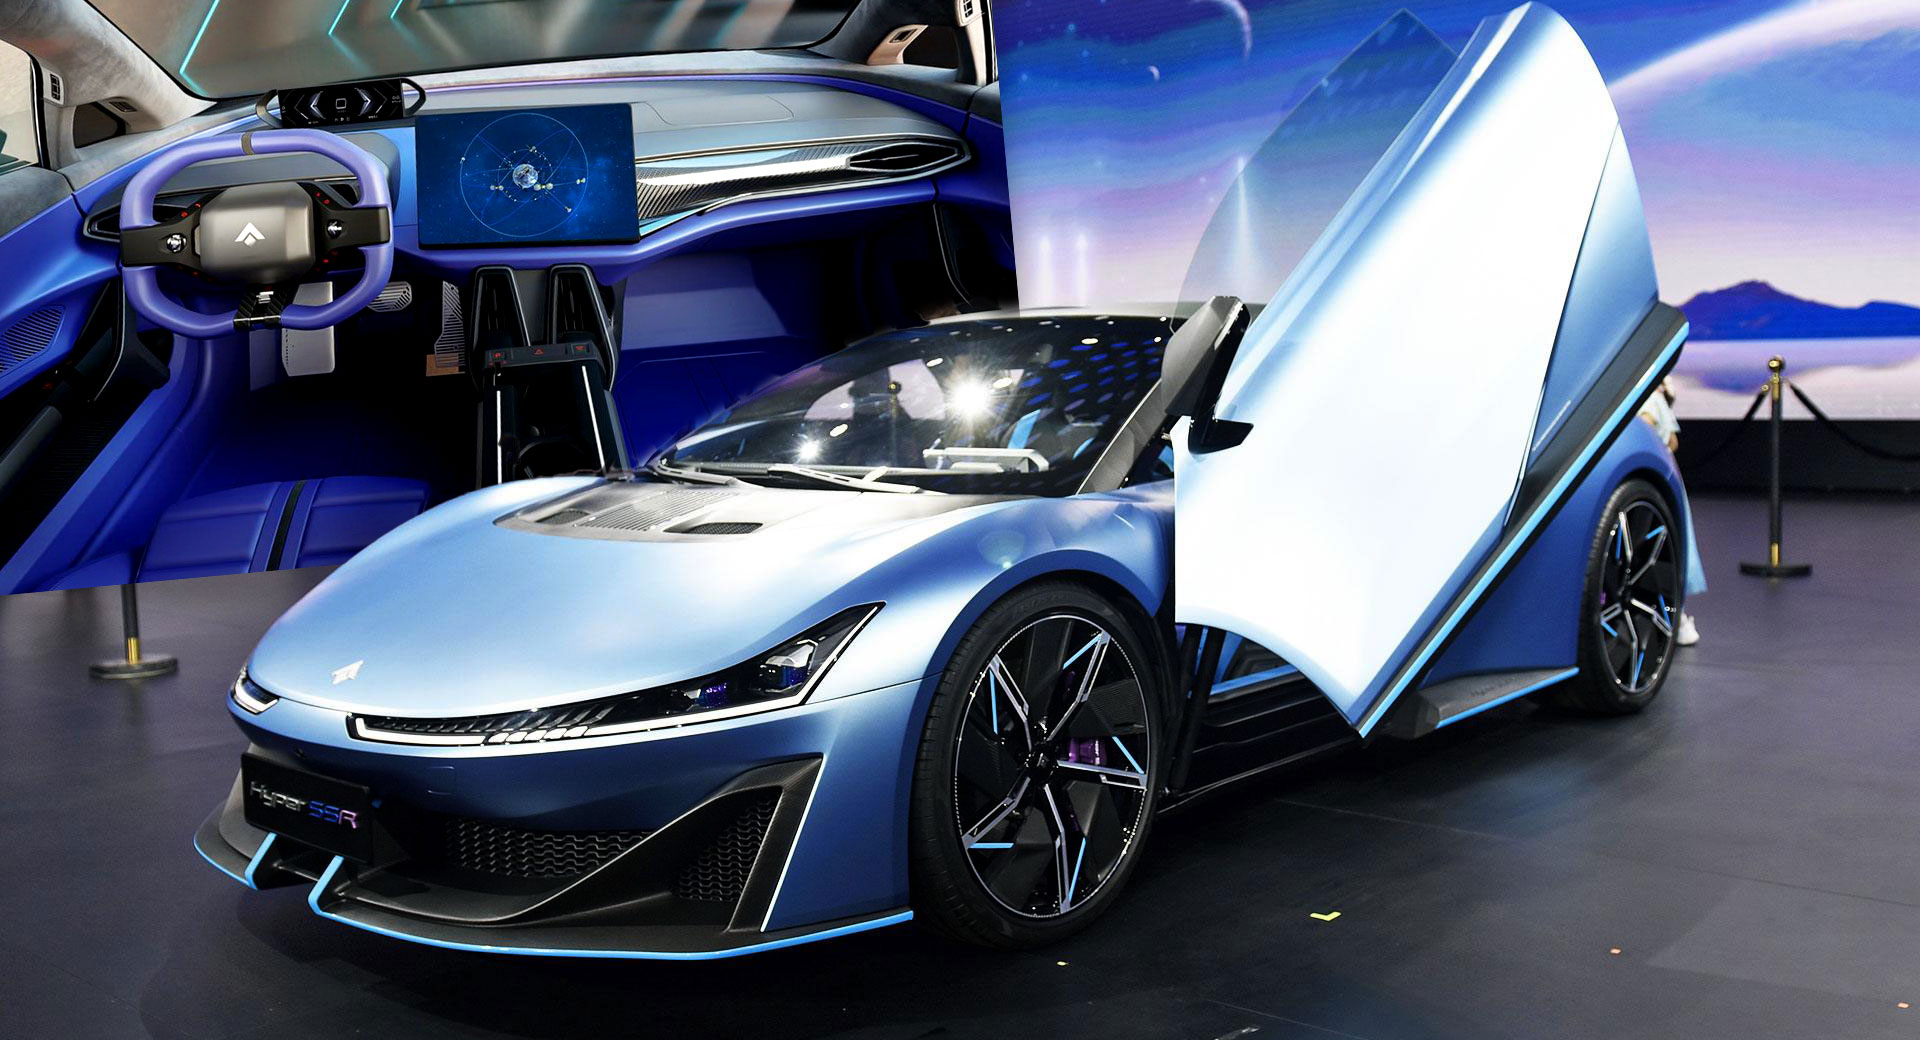 The GAC Aion Hyper SSR Is China’s First Electric Supercar And It Can Do 0-60 In 1.9-Sec